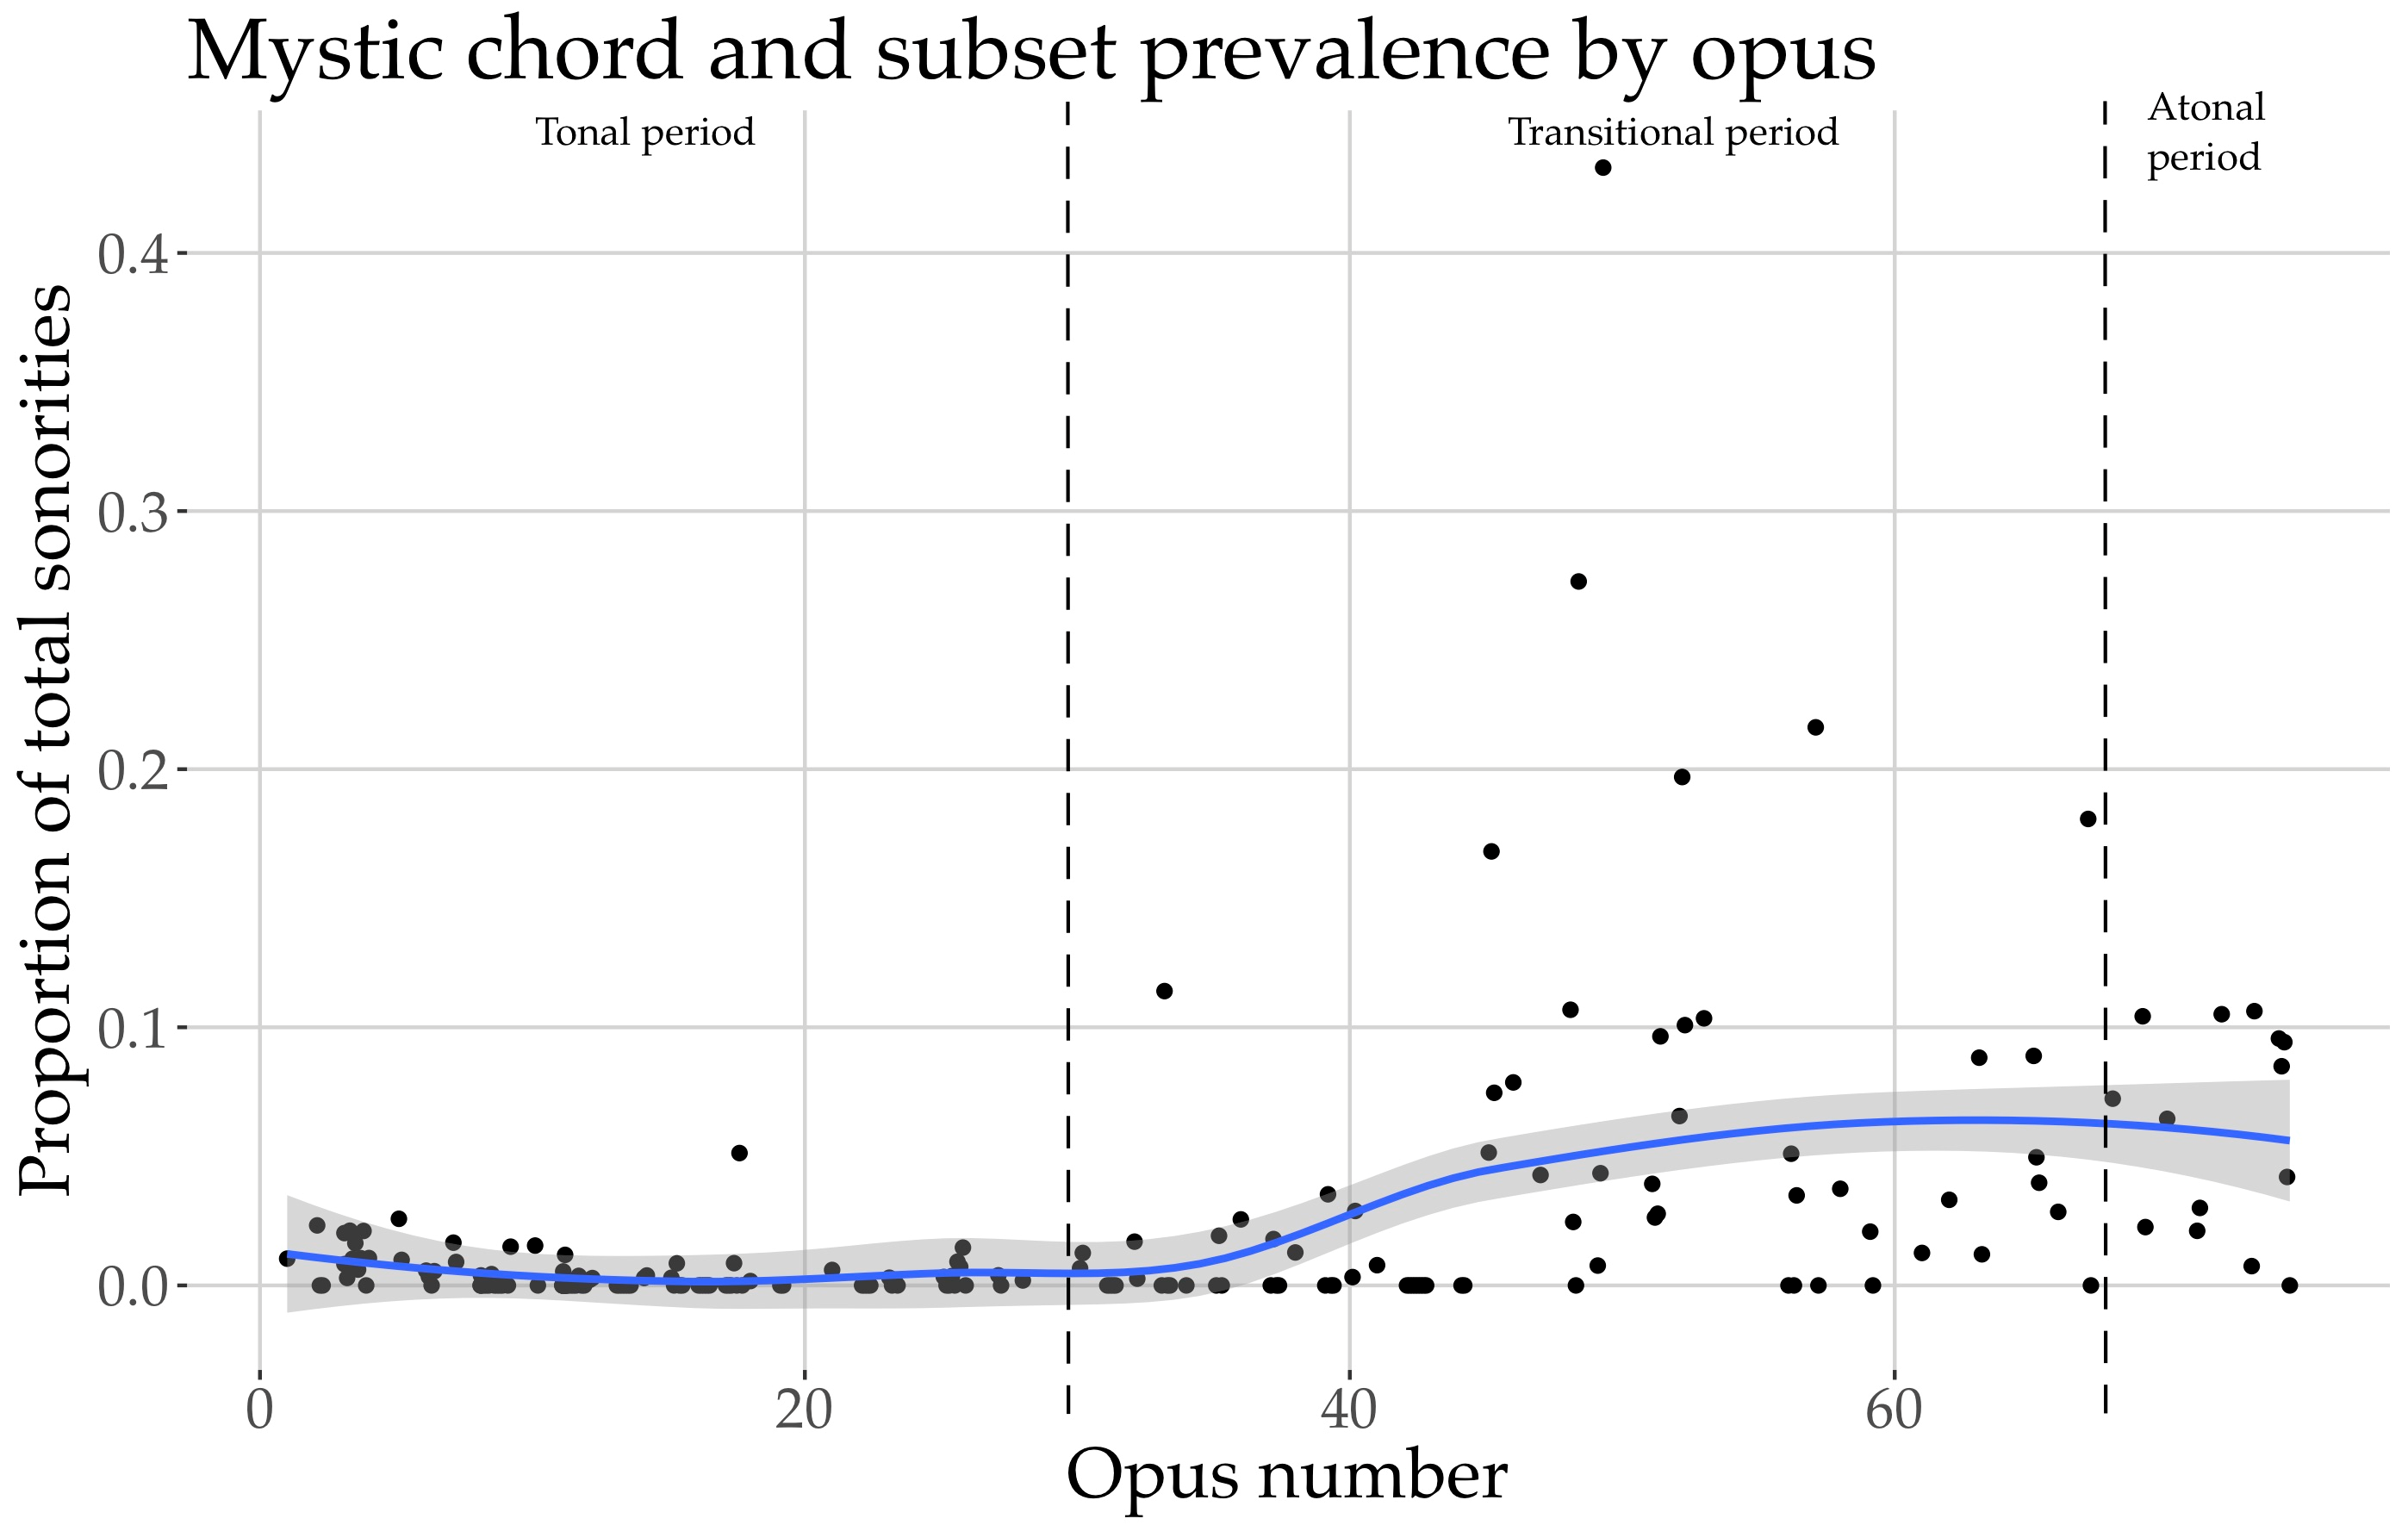 Graph showing Mystic chord and subset prevalence by opus. More description below.